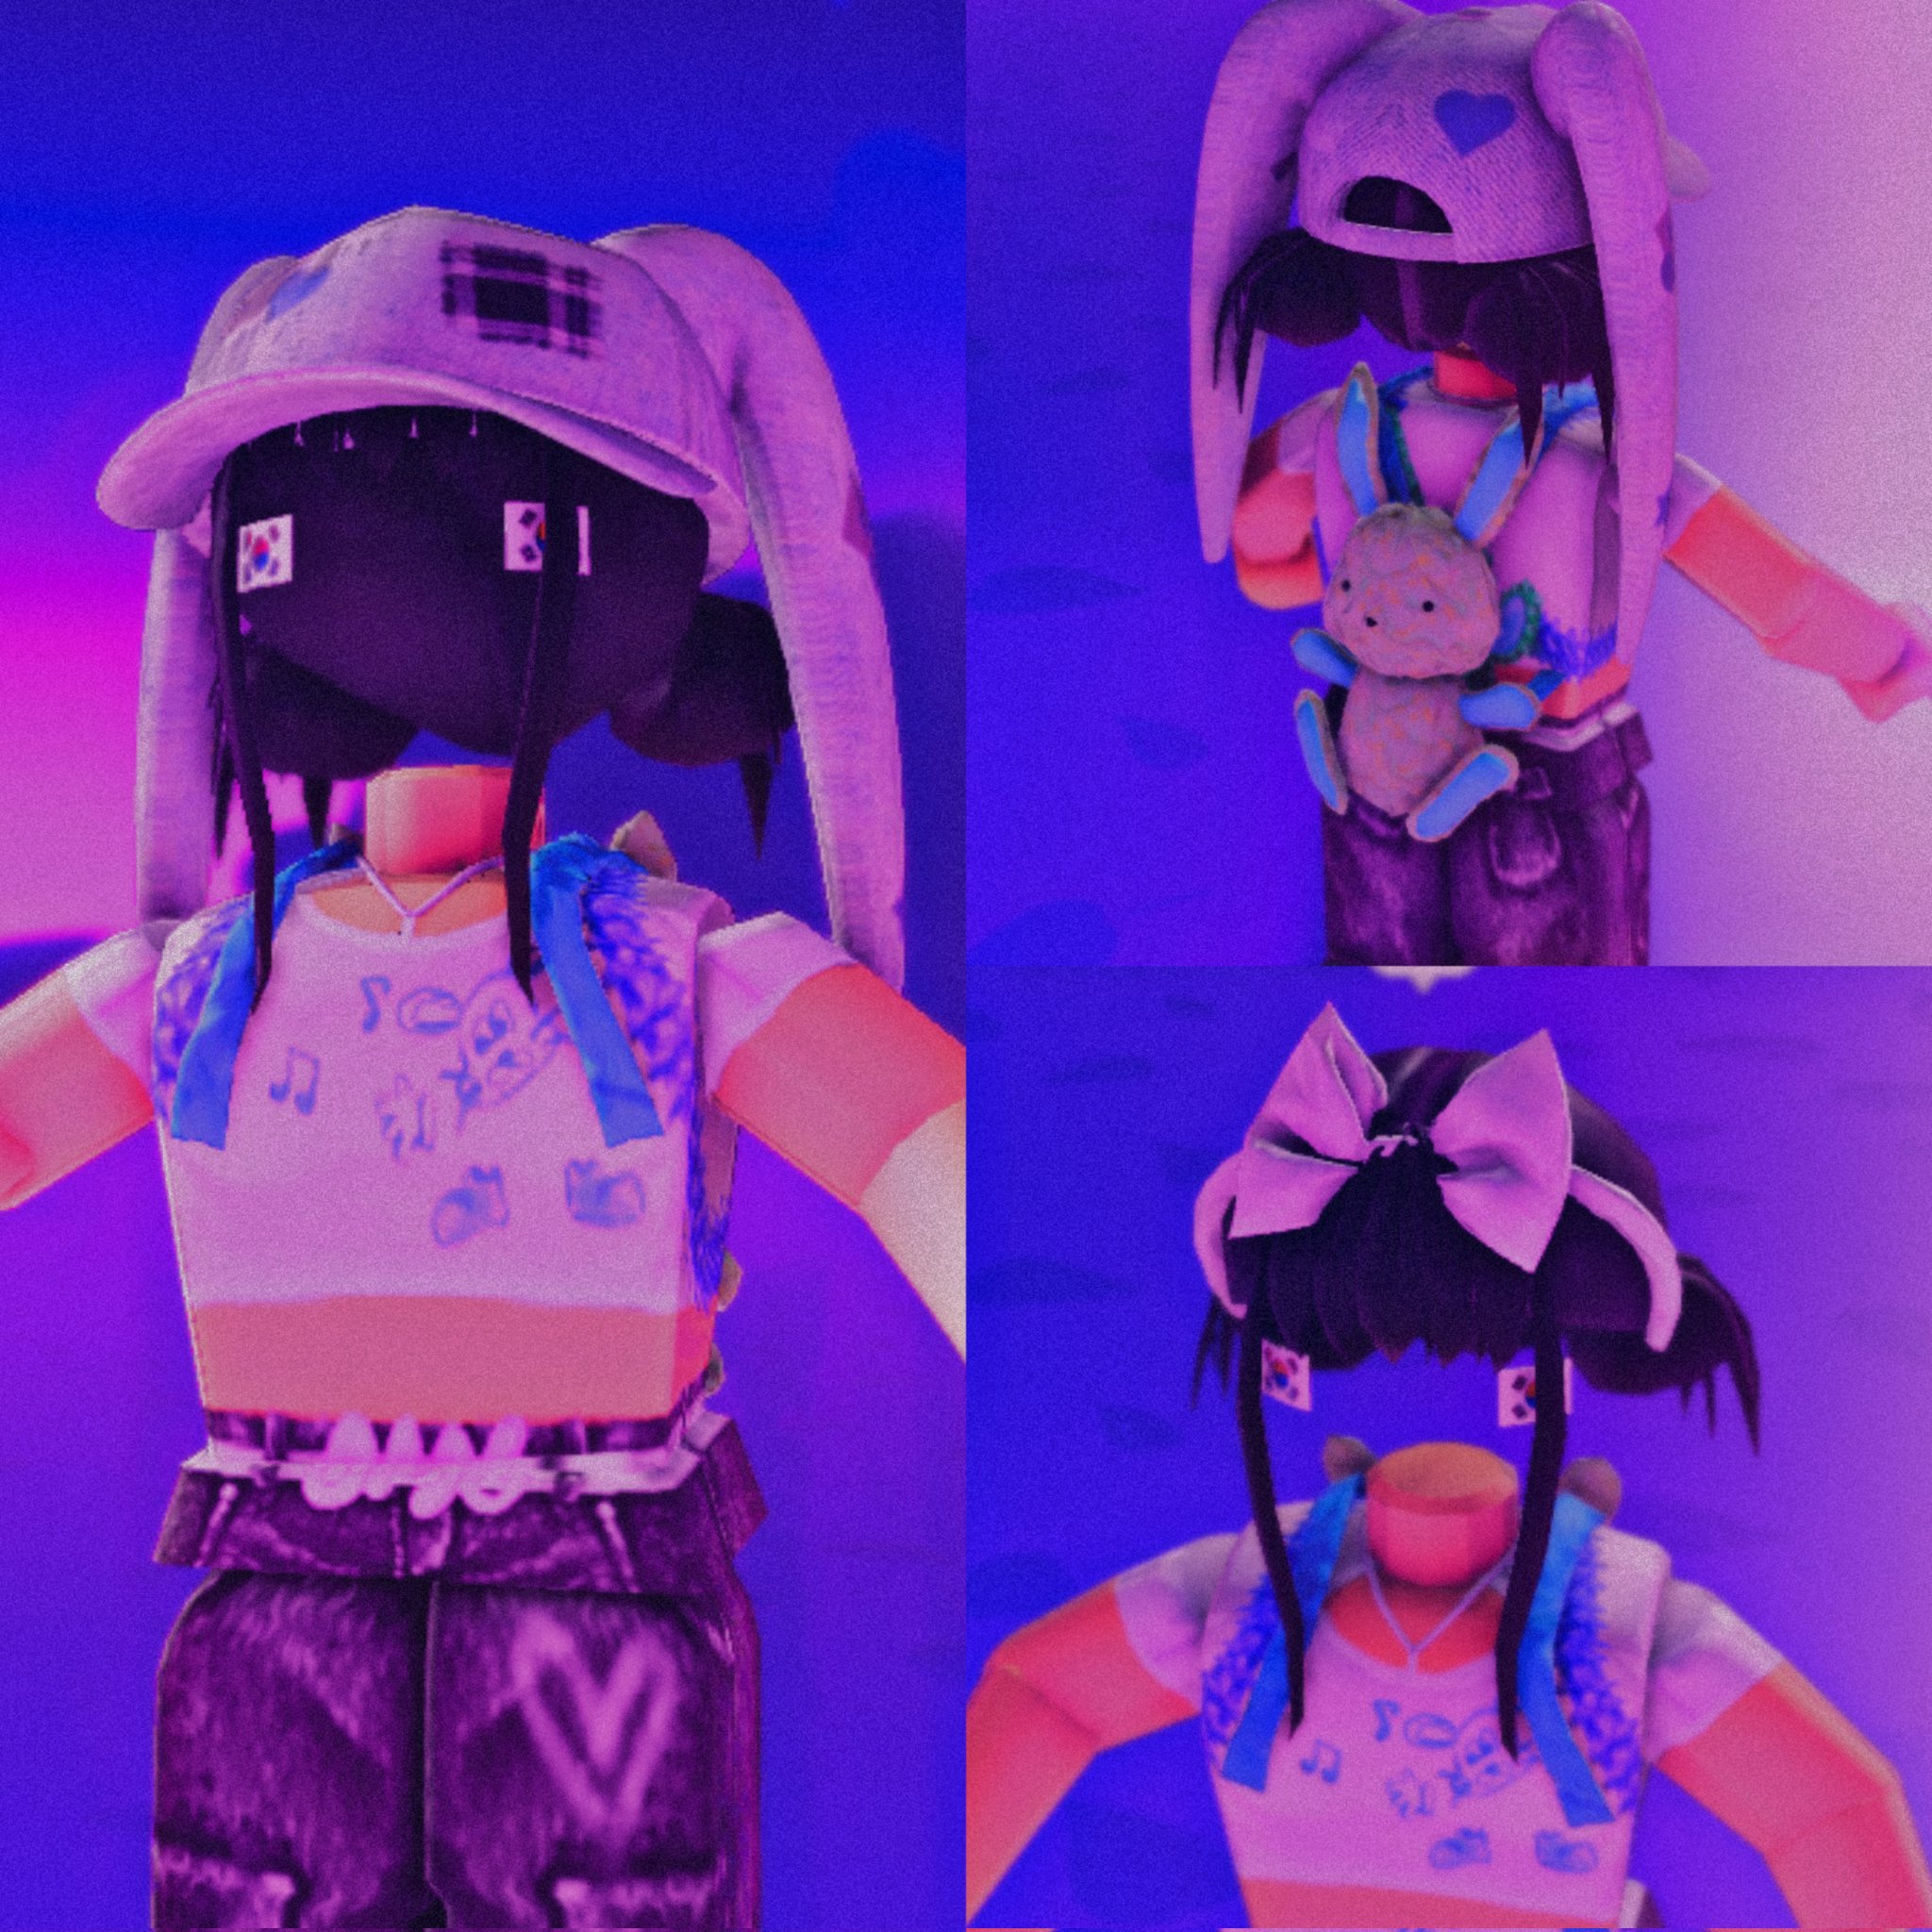 EventHunters - Roblox News on X: FREE HAIR ACCESSORY: You can now